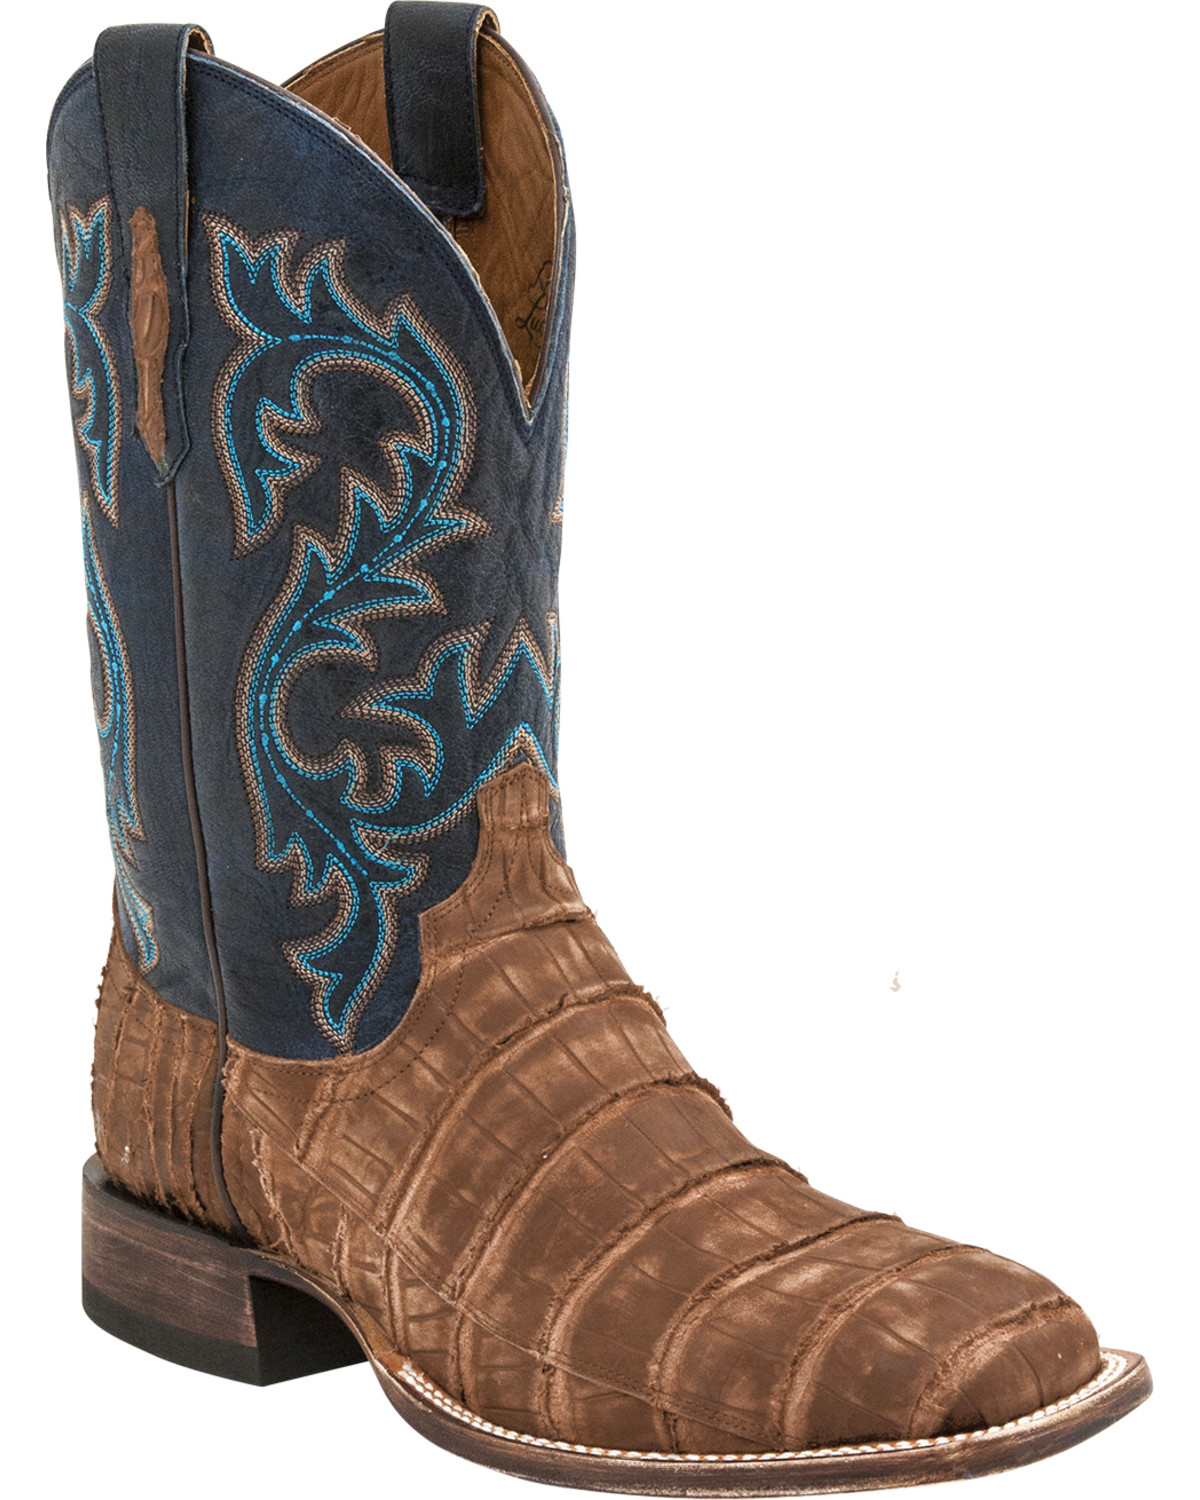 Malcolm Alligator Exotic Boots | Boot Barn